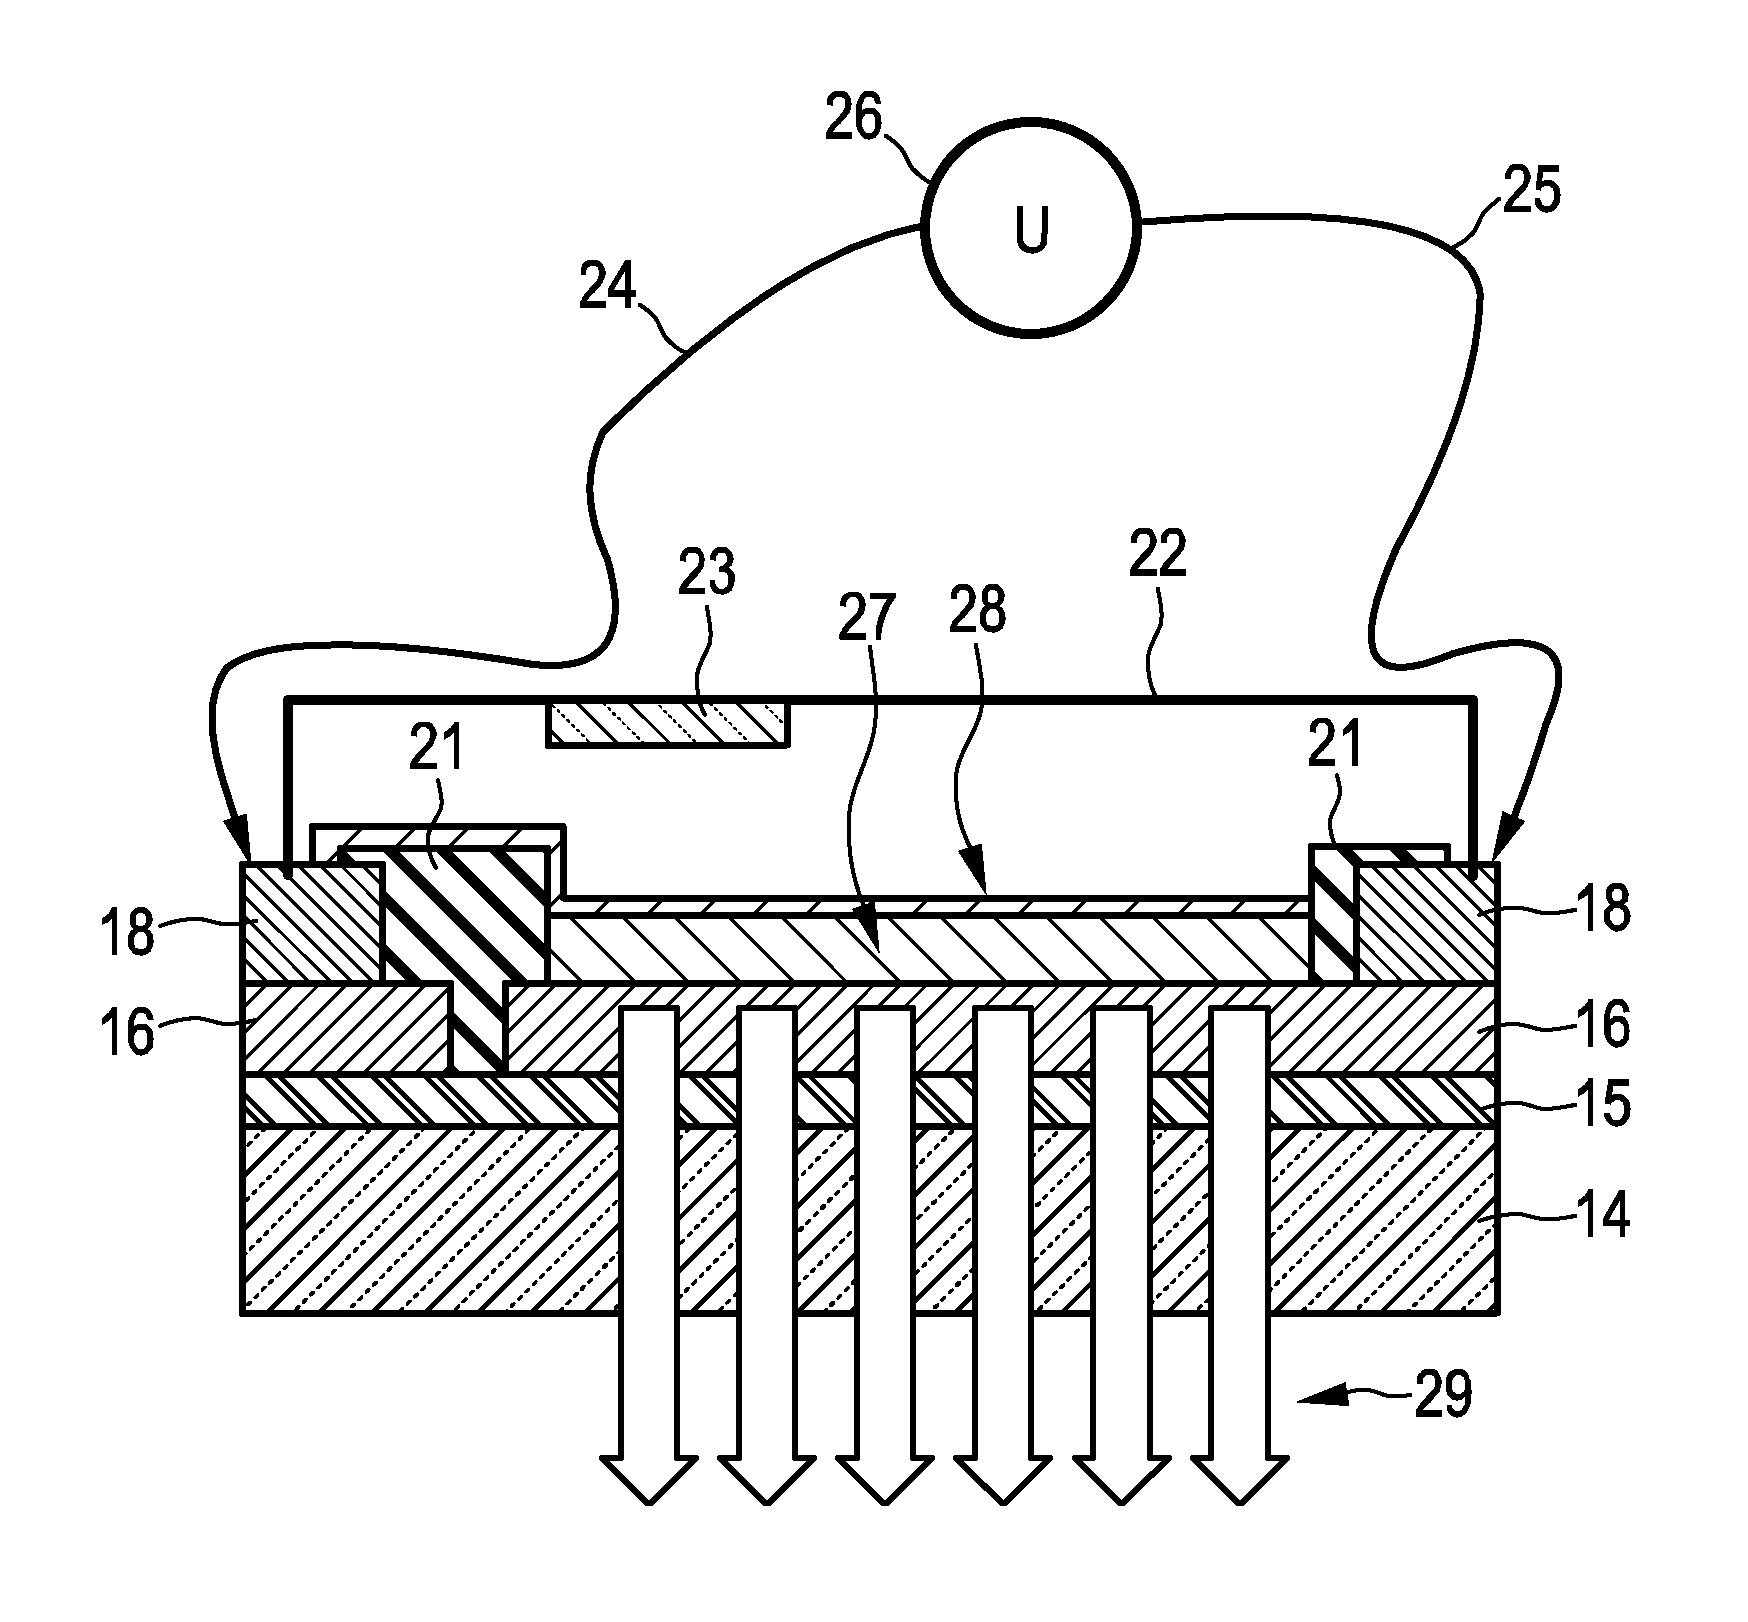 Fabrication apparatus for fabricating a patterned layer